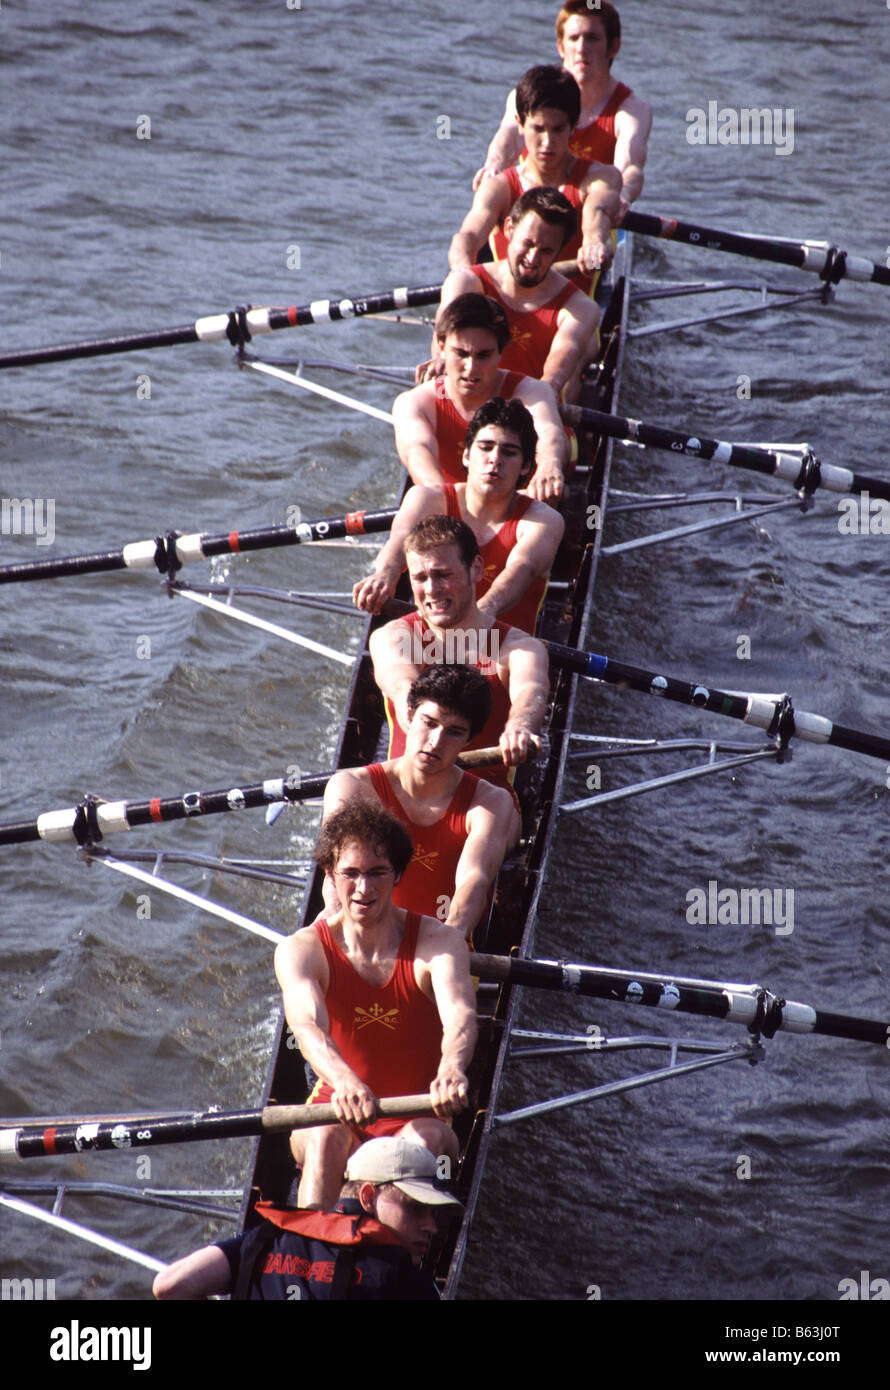 Mansfield College eights crew rowing hard, competing in the Oxford Eights boat race, Thames River, England Stock Photo